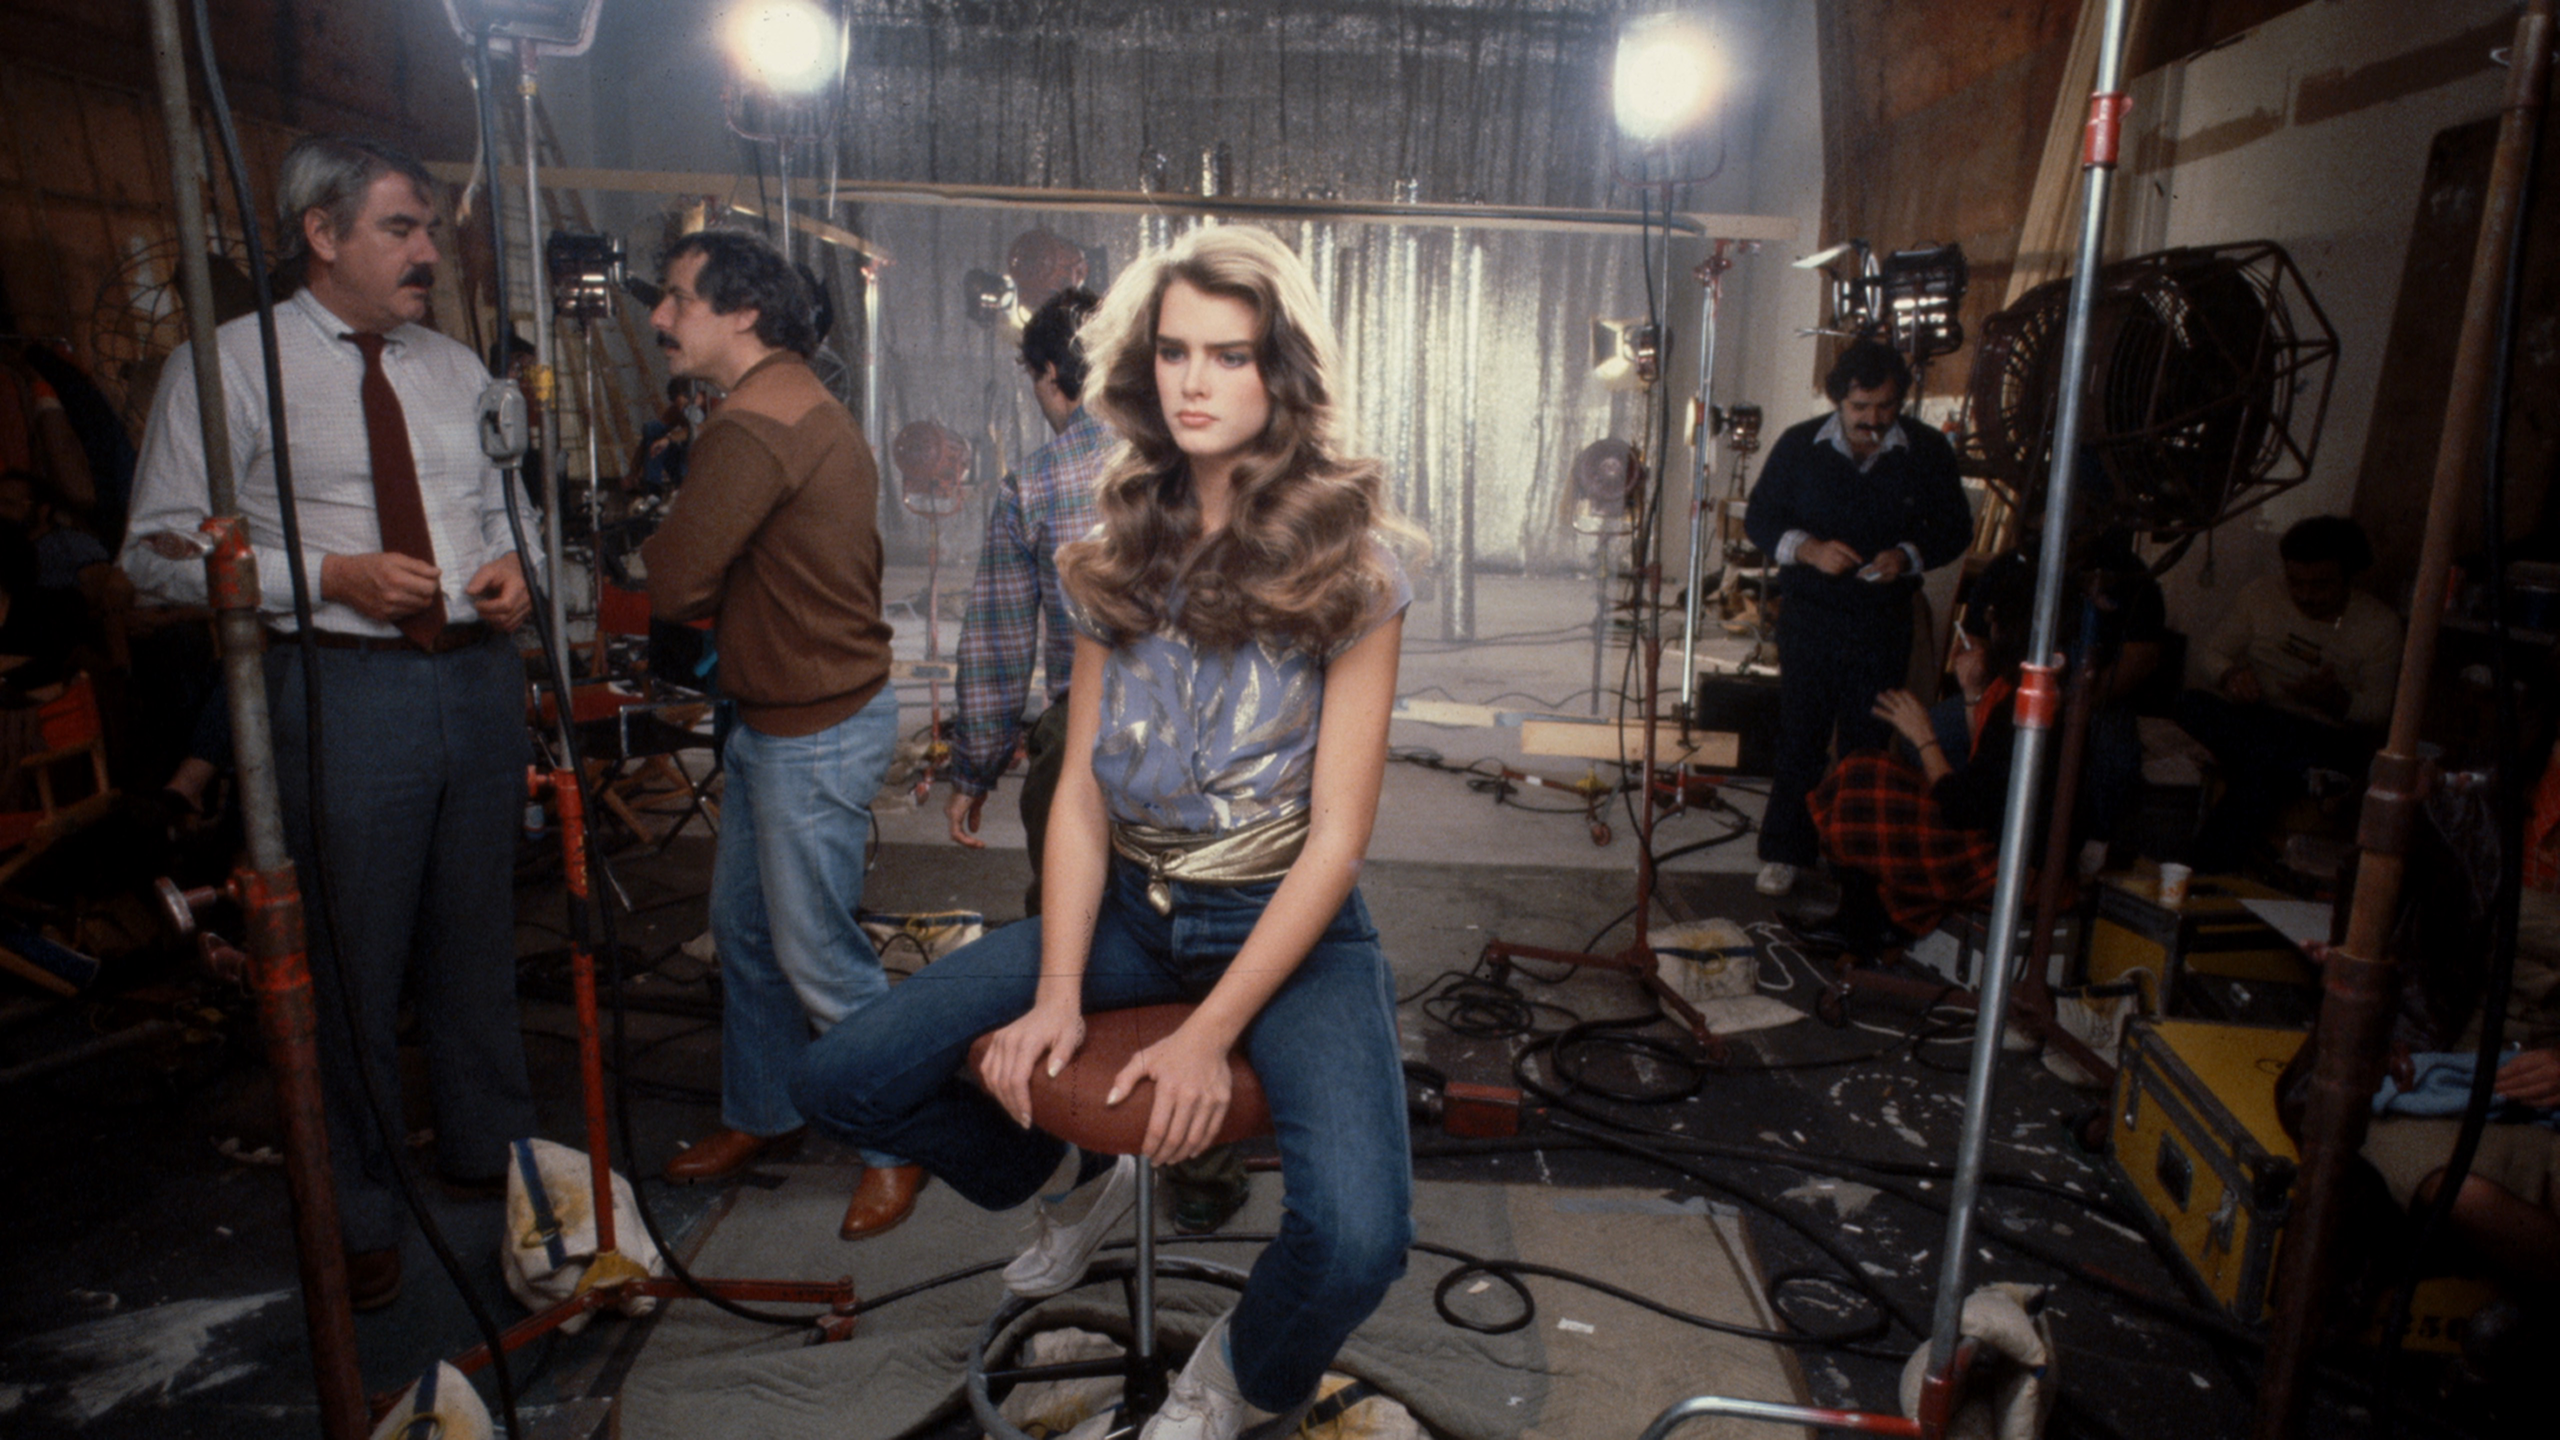 A younger Brooke Shields sitting on a stool with a blank stare.